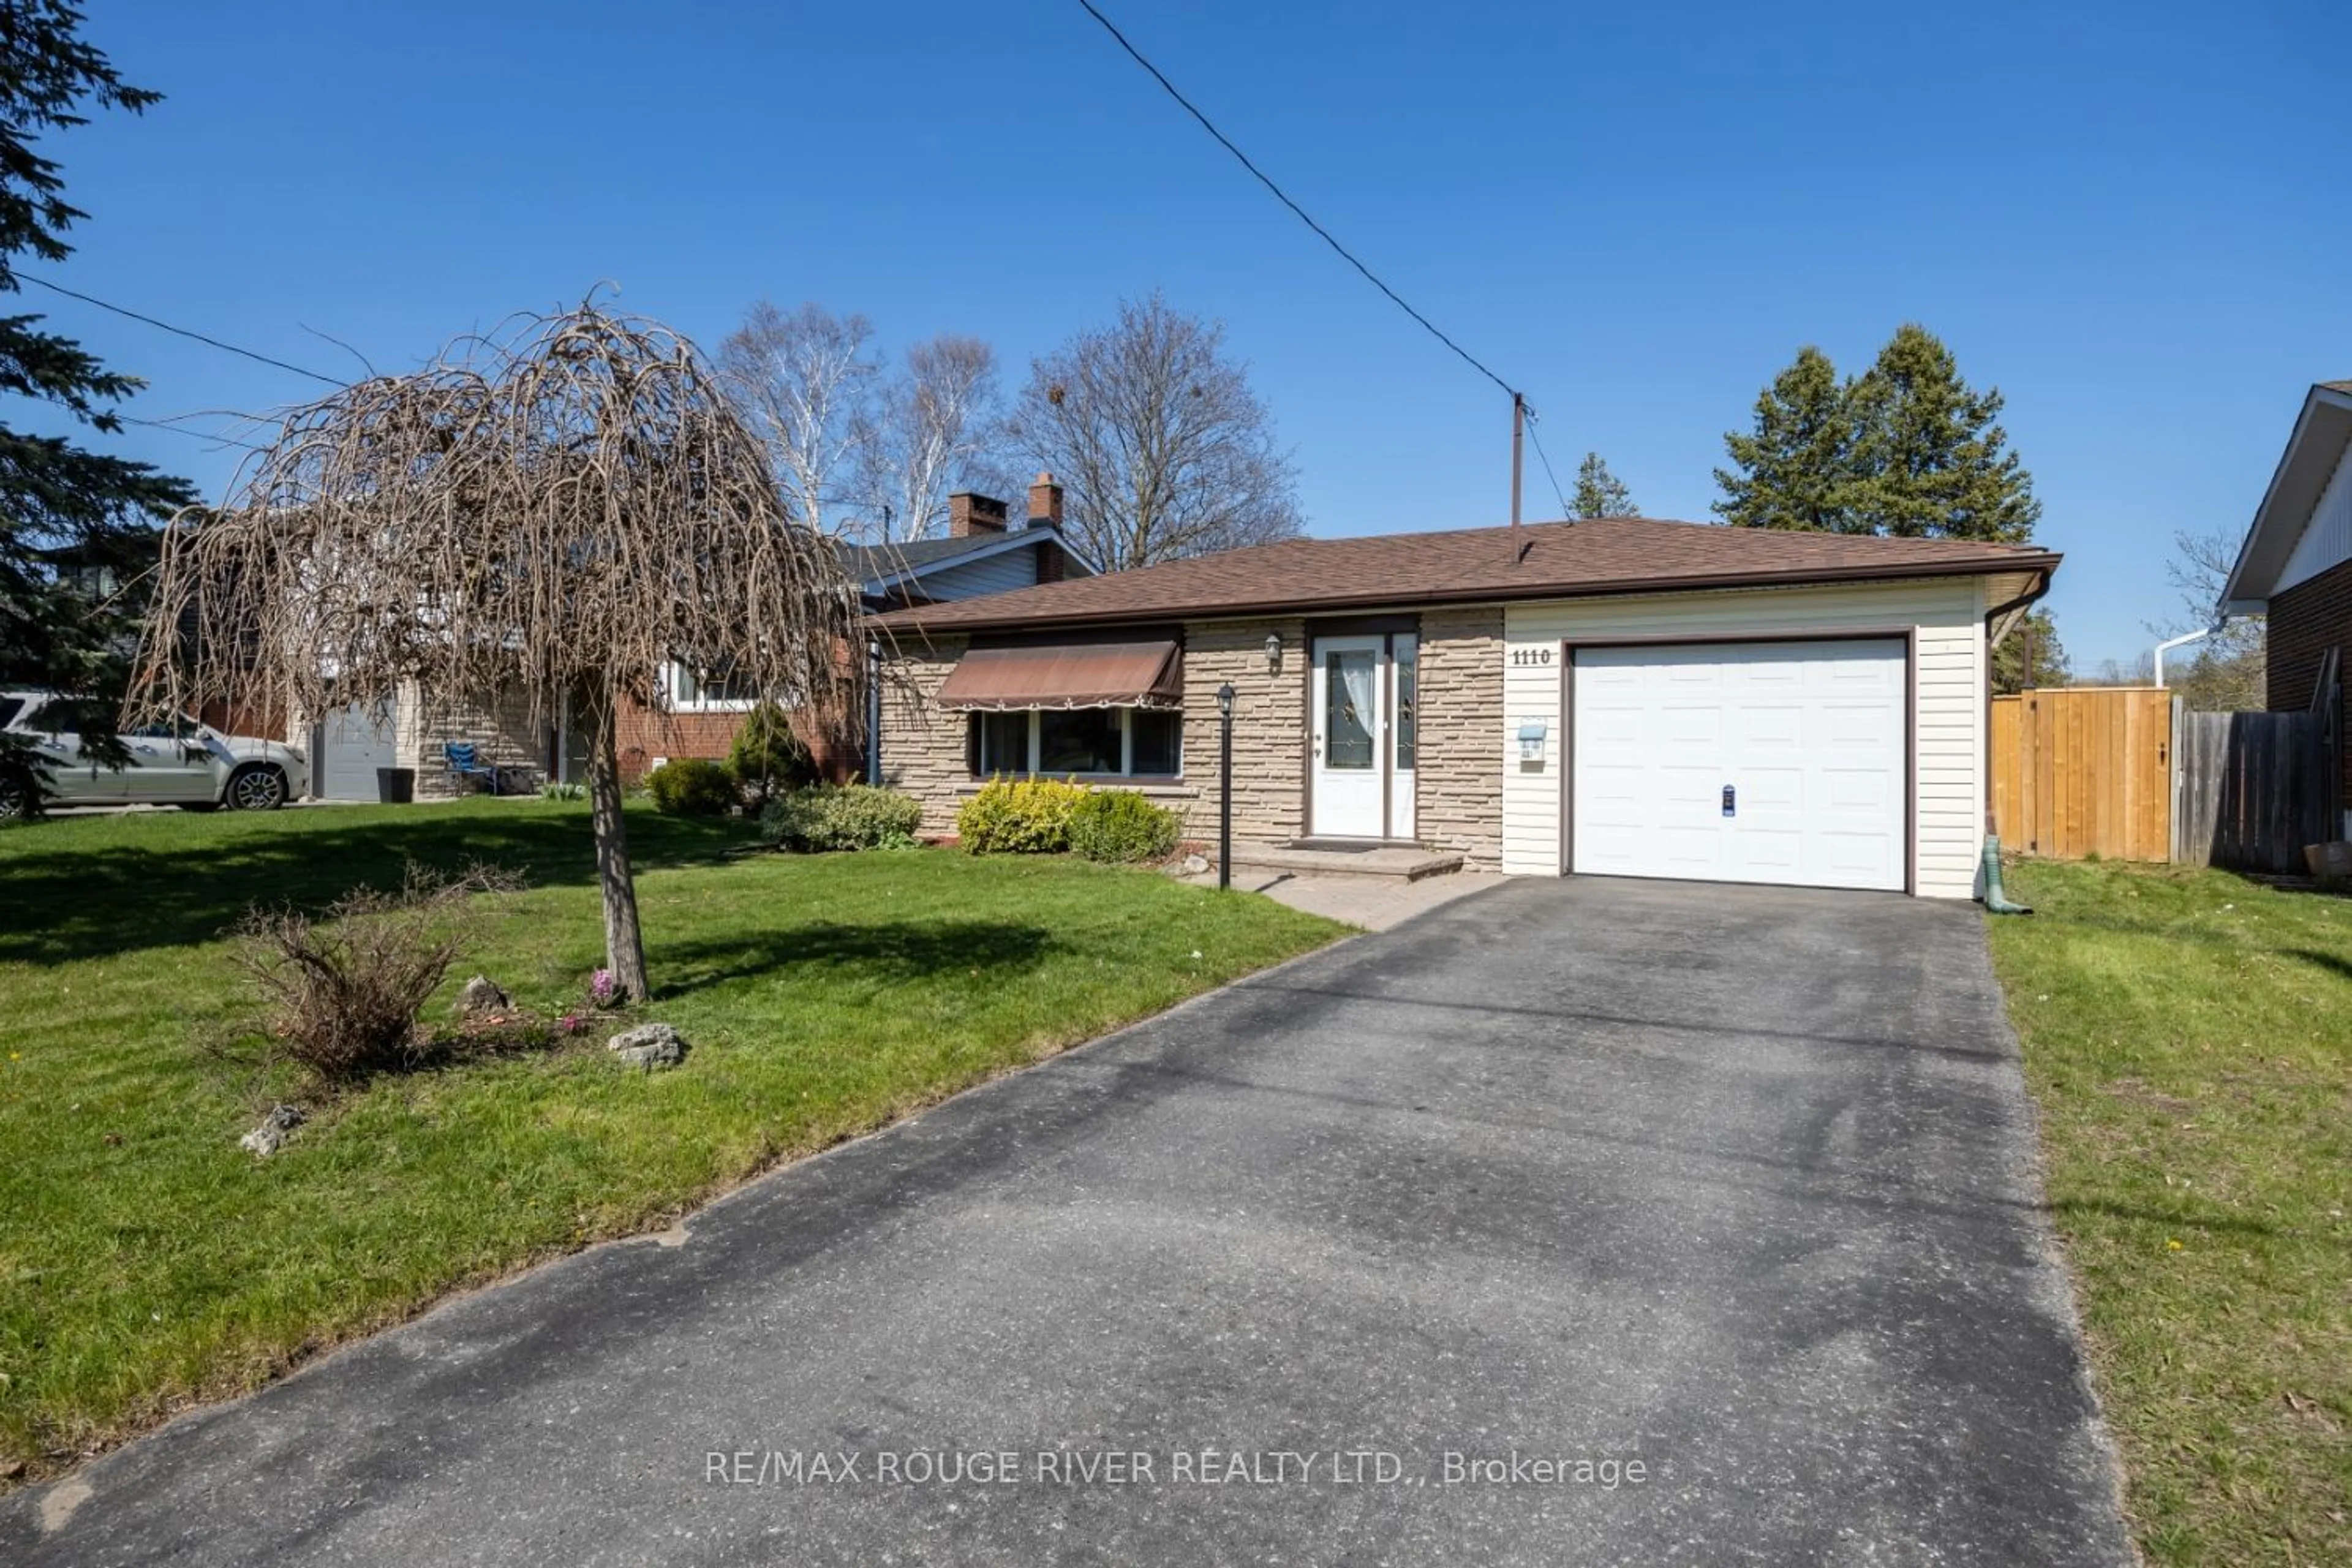 Frontside or backside of a home for 1110 Ronlea Ave, Oshawa Ontario L1H 2X9